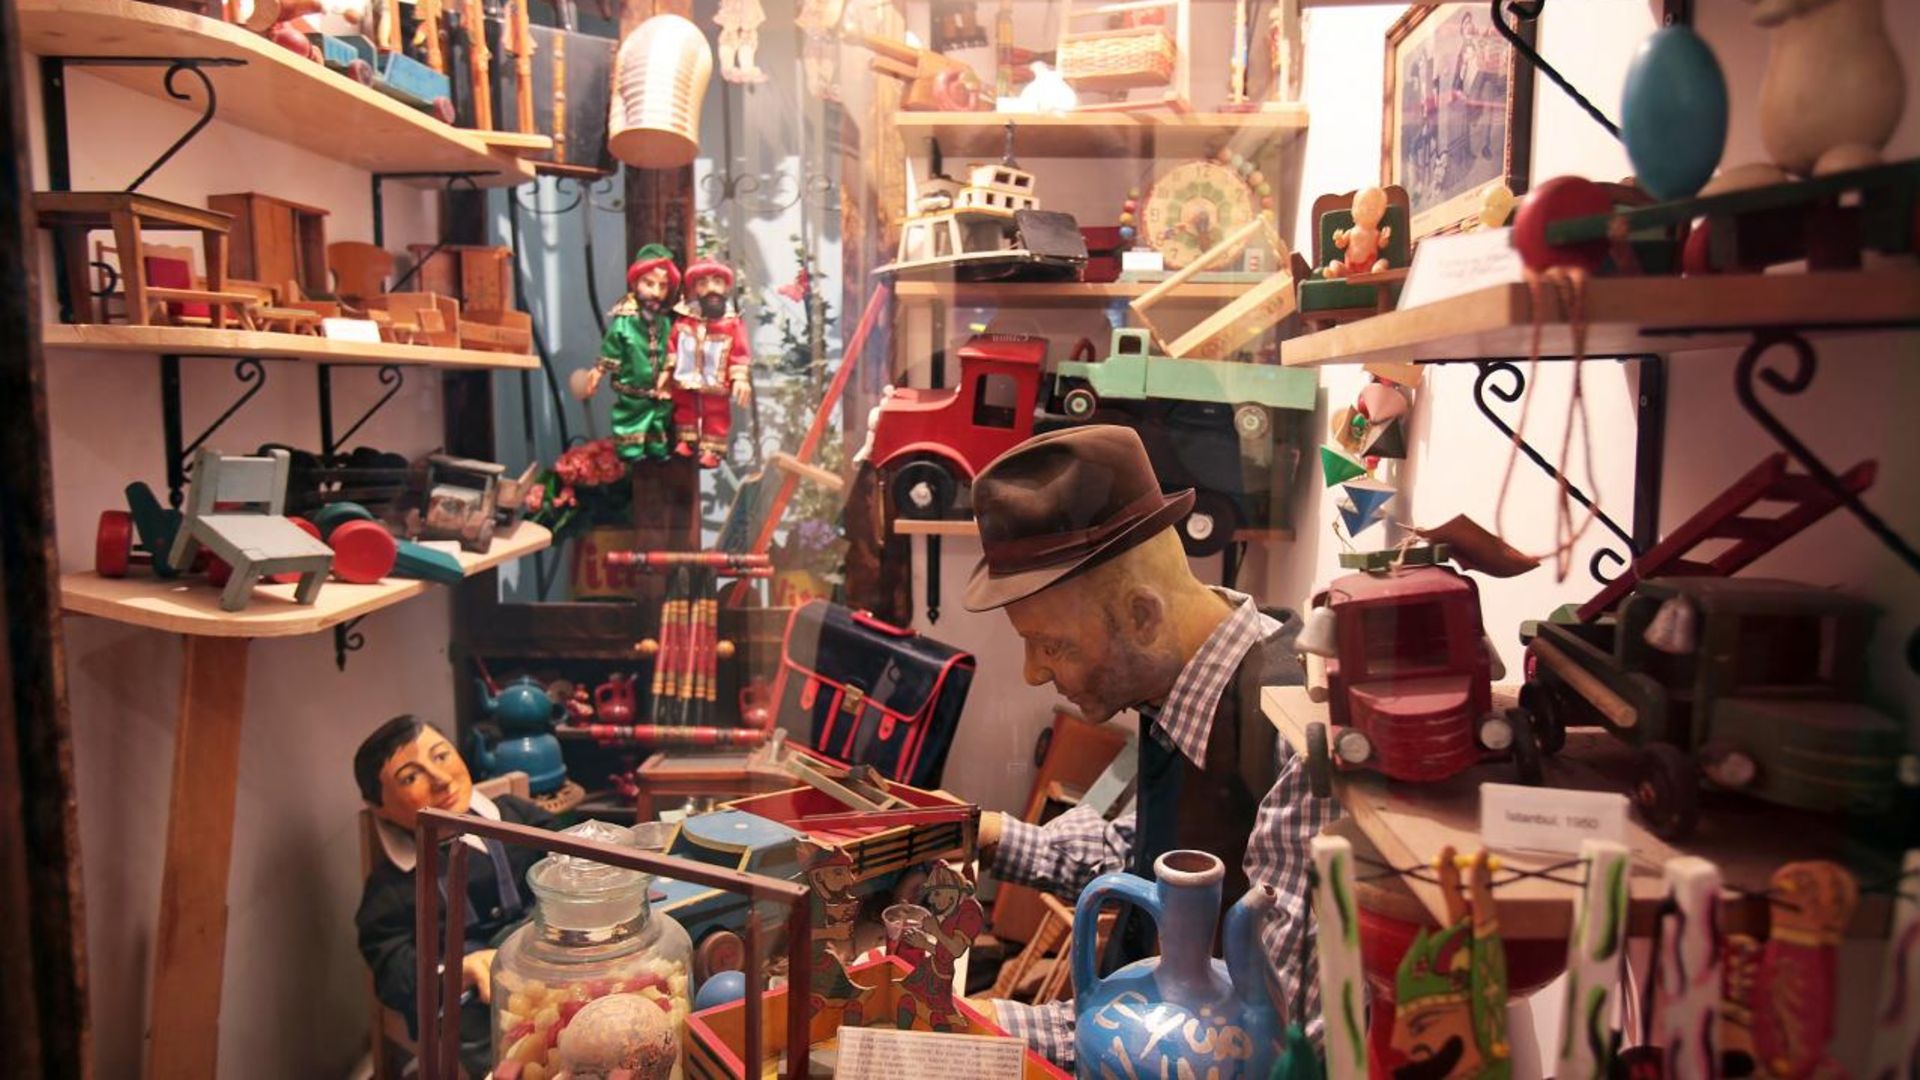 The Toy Museum: A Whimsical Wonderland in the Heart of Istanbul